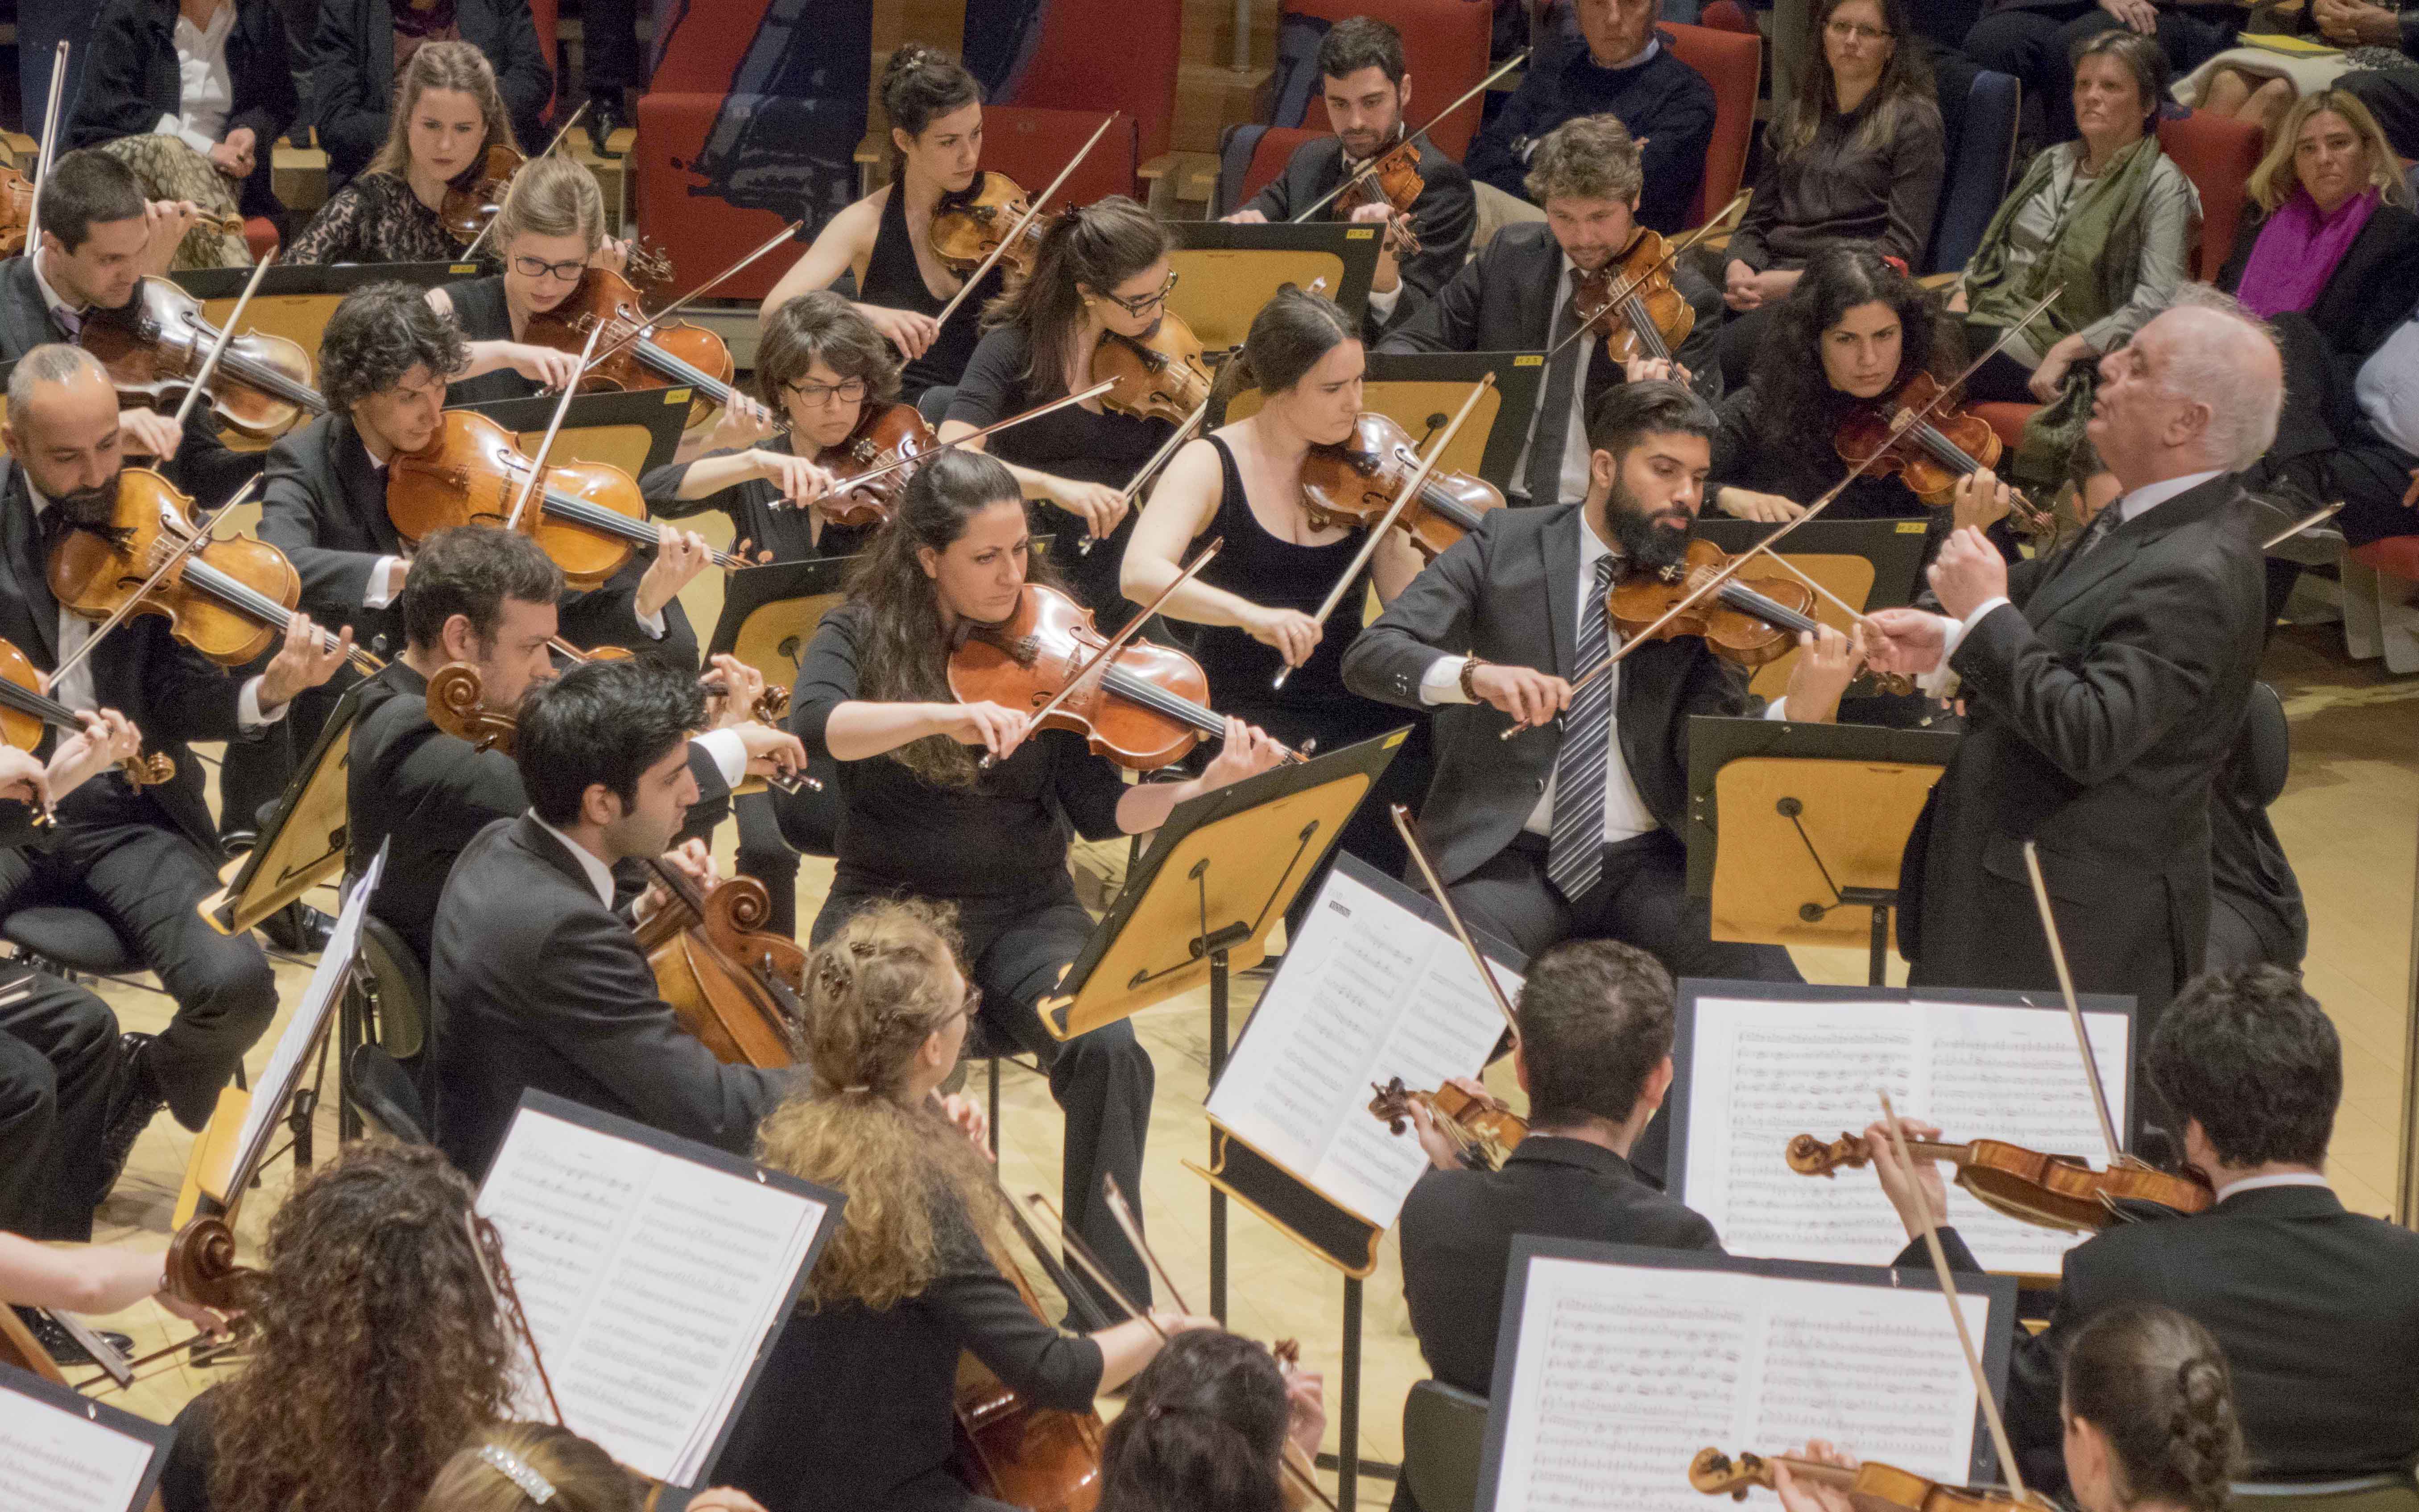 The West-Eastern Divan Orchestra returns to the Pierre Boulez Saal